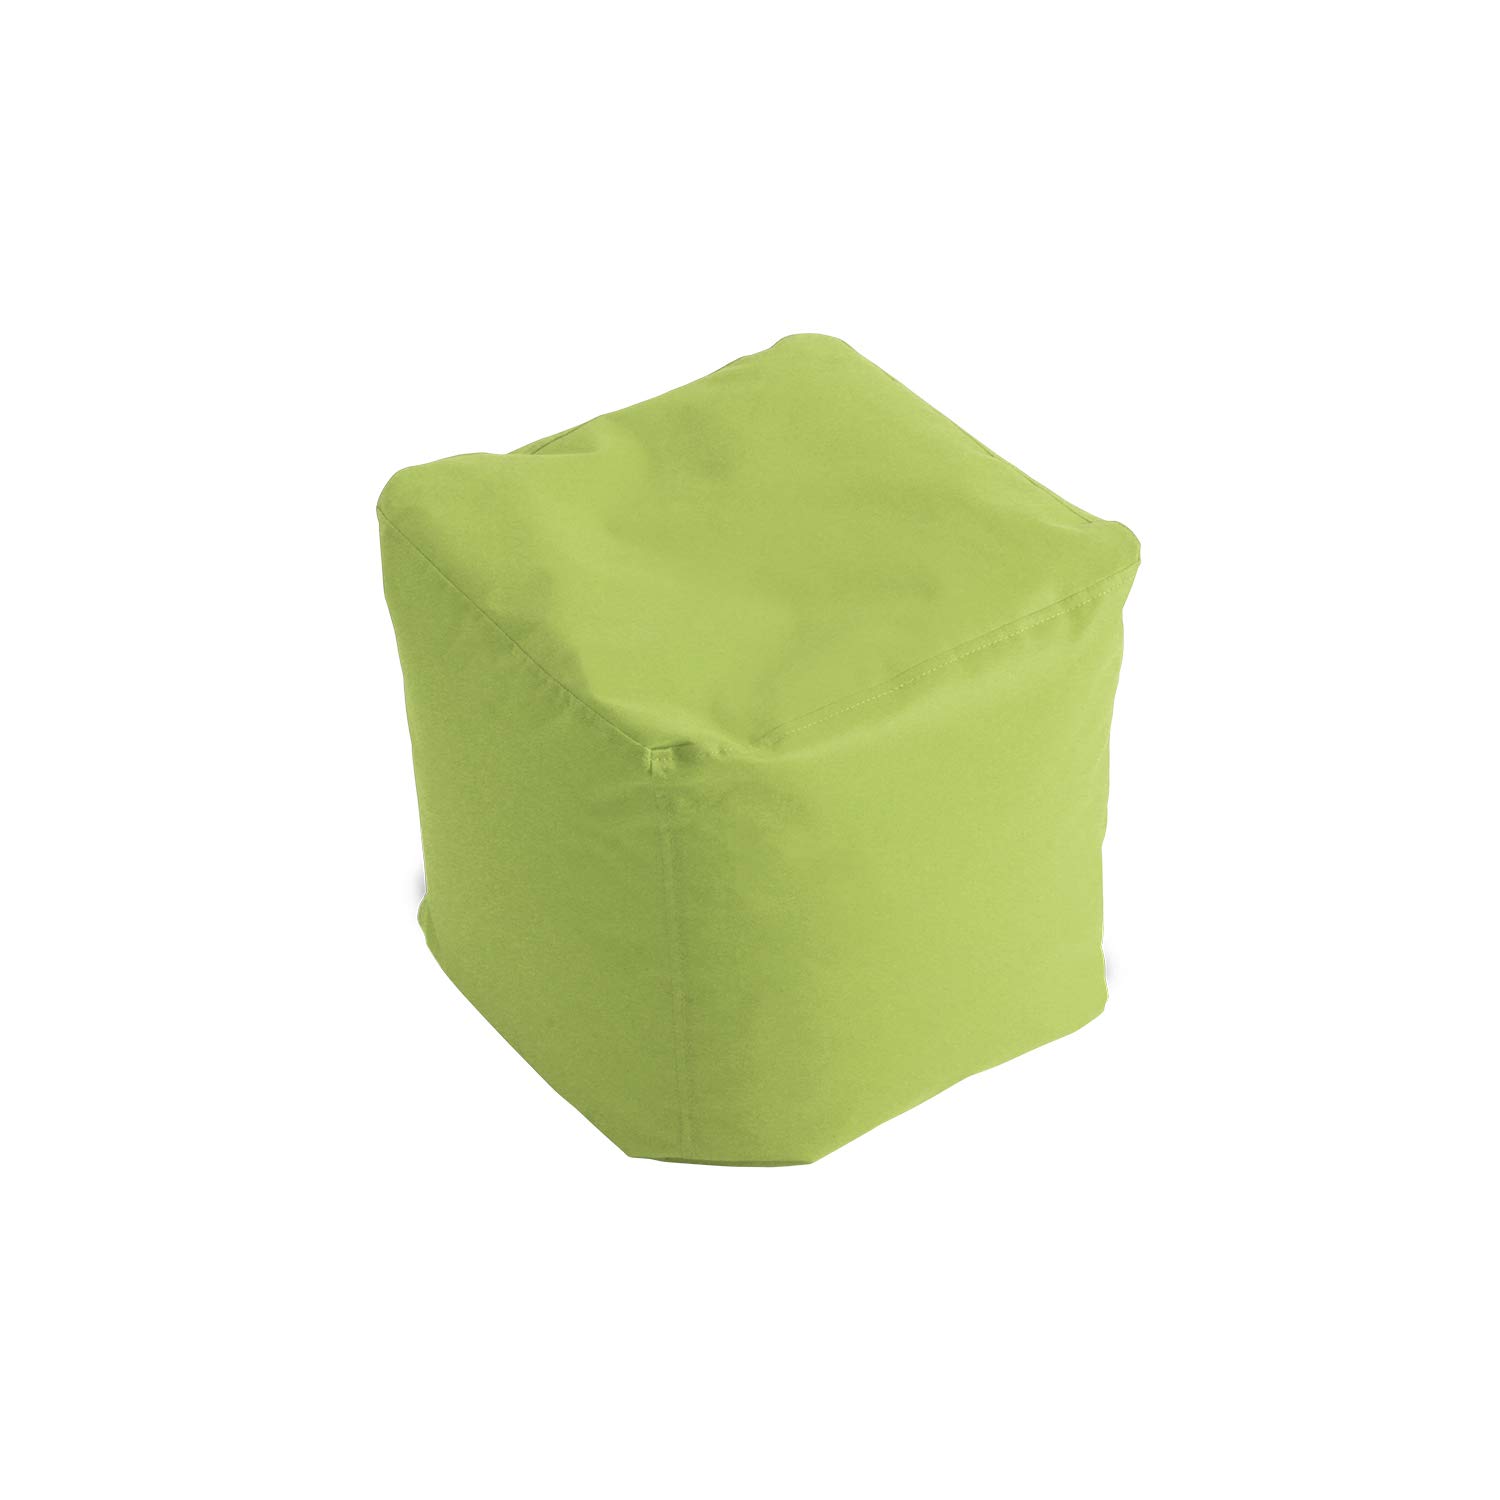 Knorr-Baby 440204 Stool Square M Colour Green